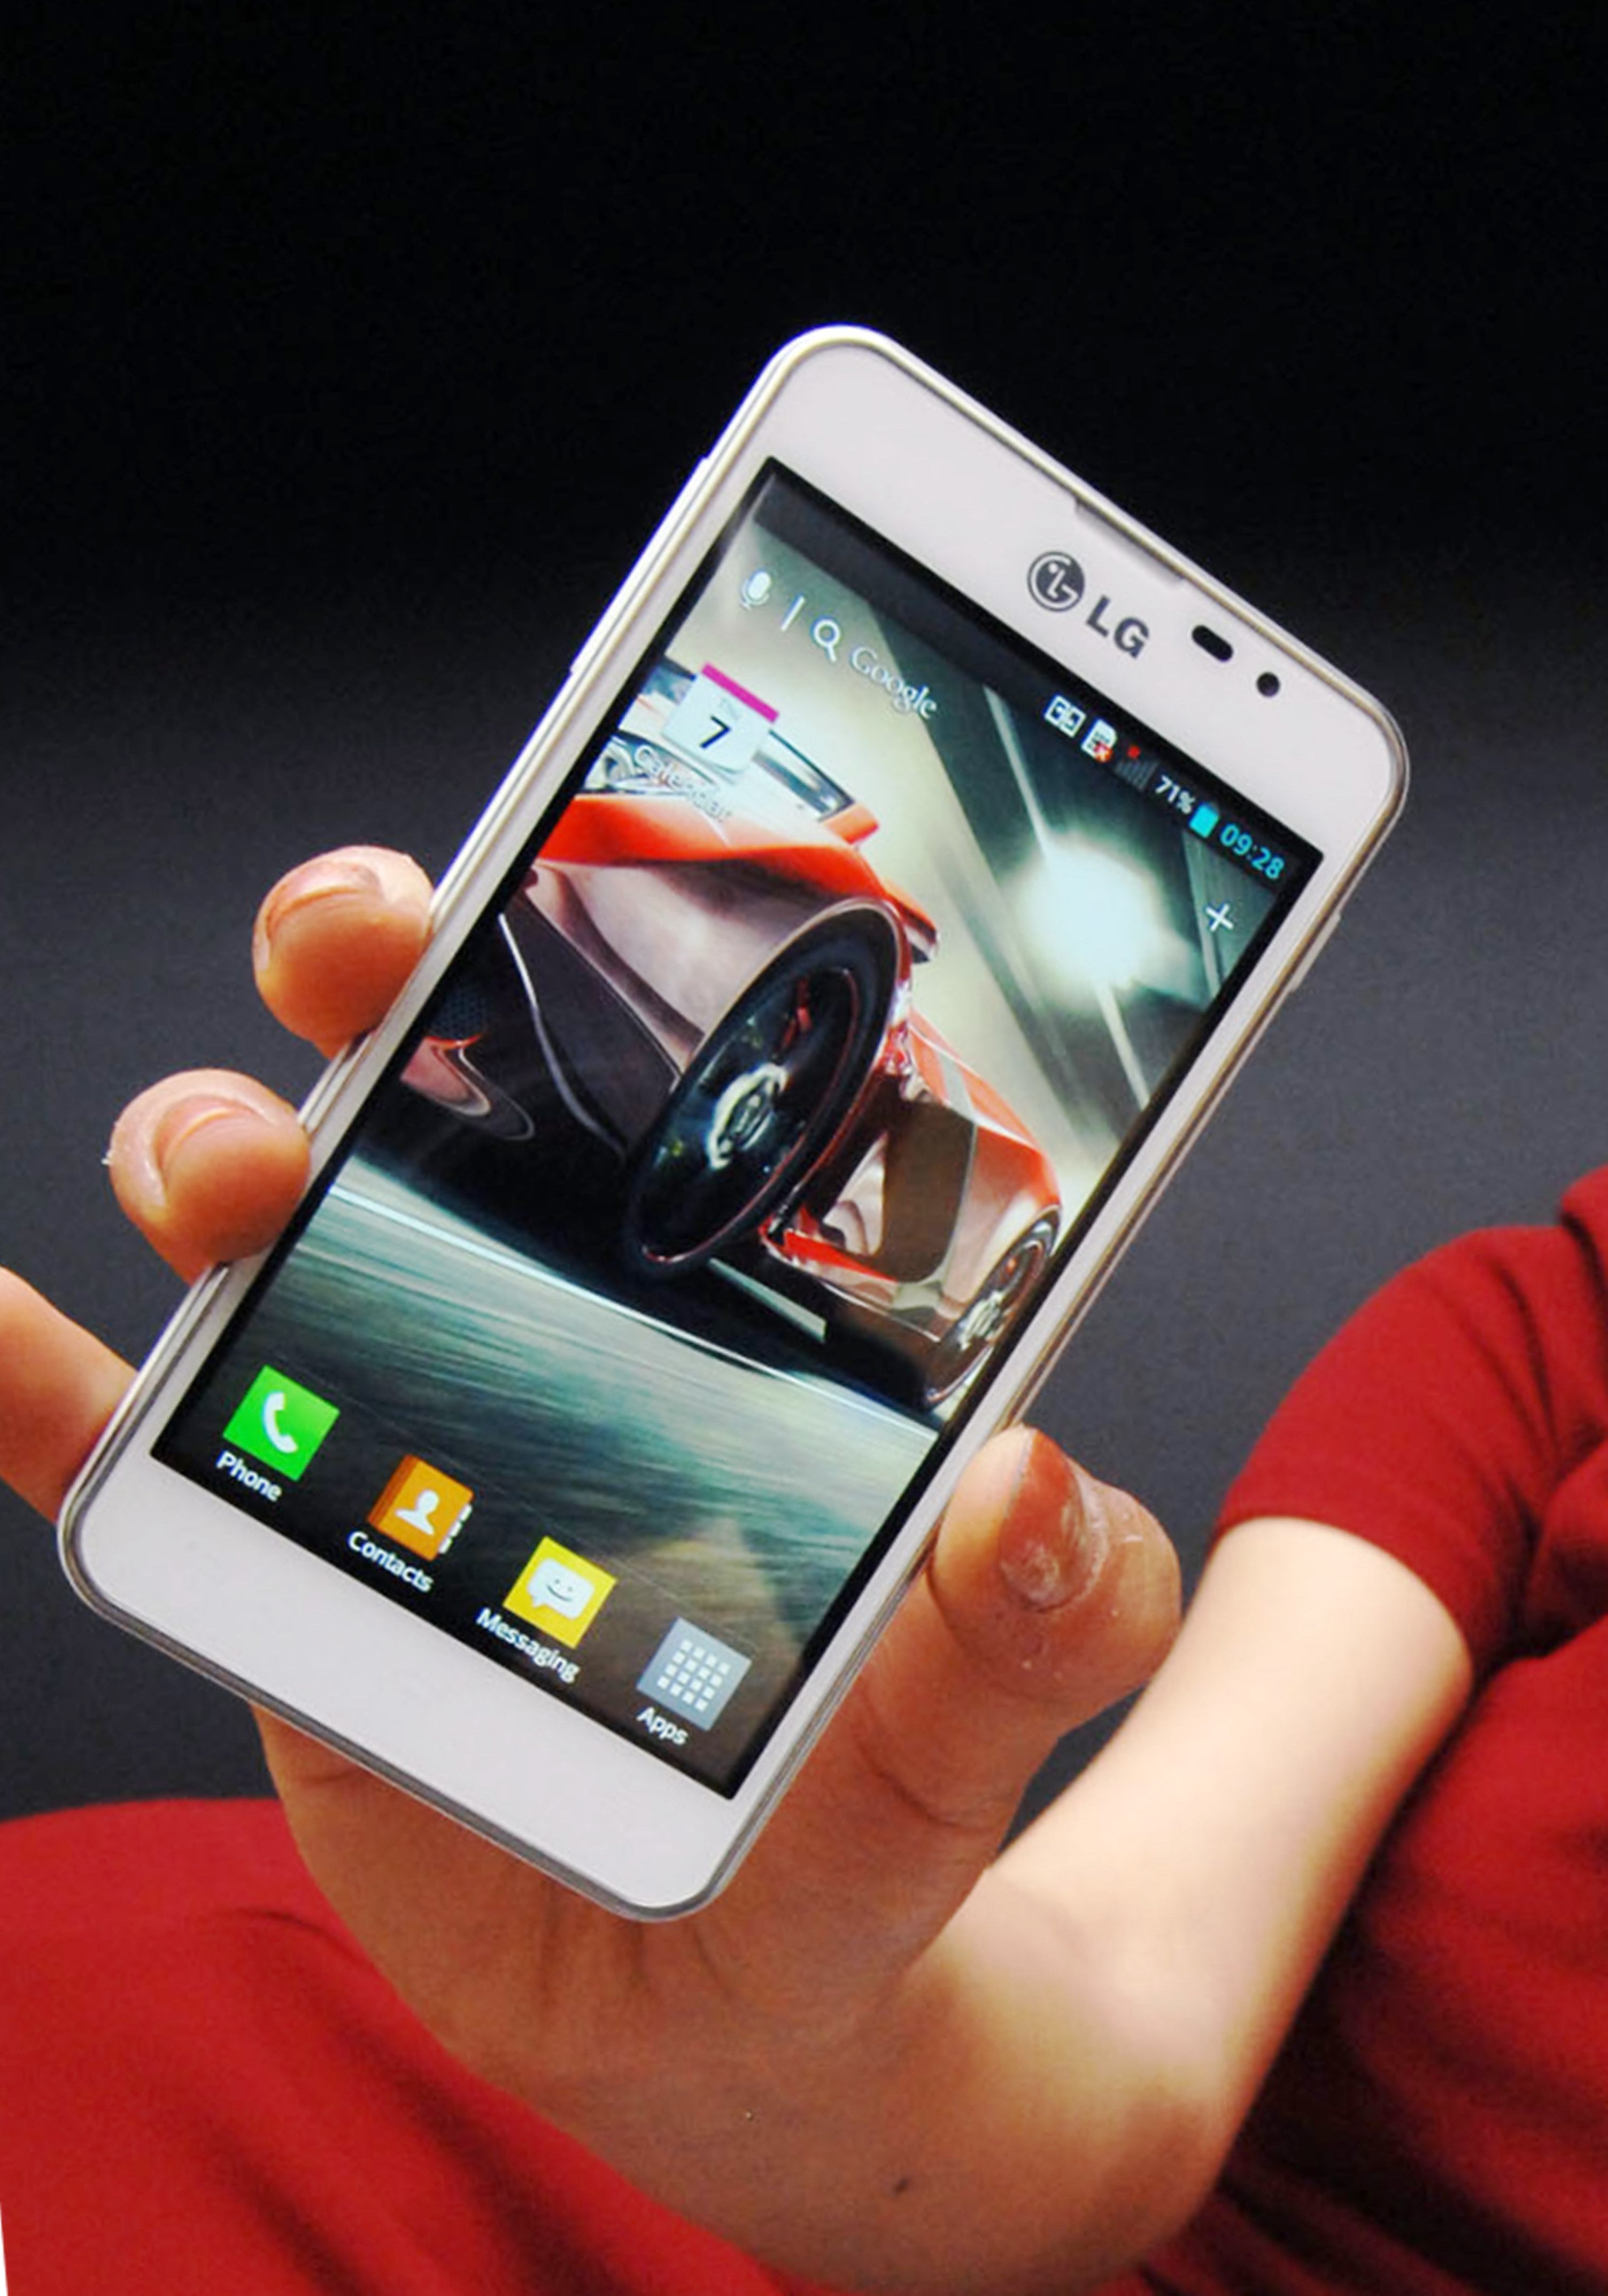 The LG Optimus F5 launches Monday in France - LG Optimus F5 launches in France on Monday